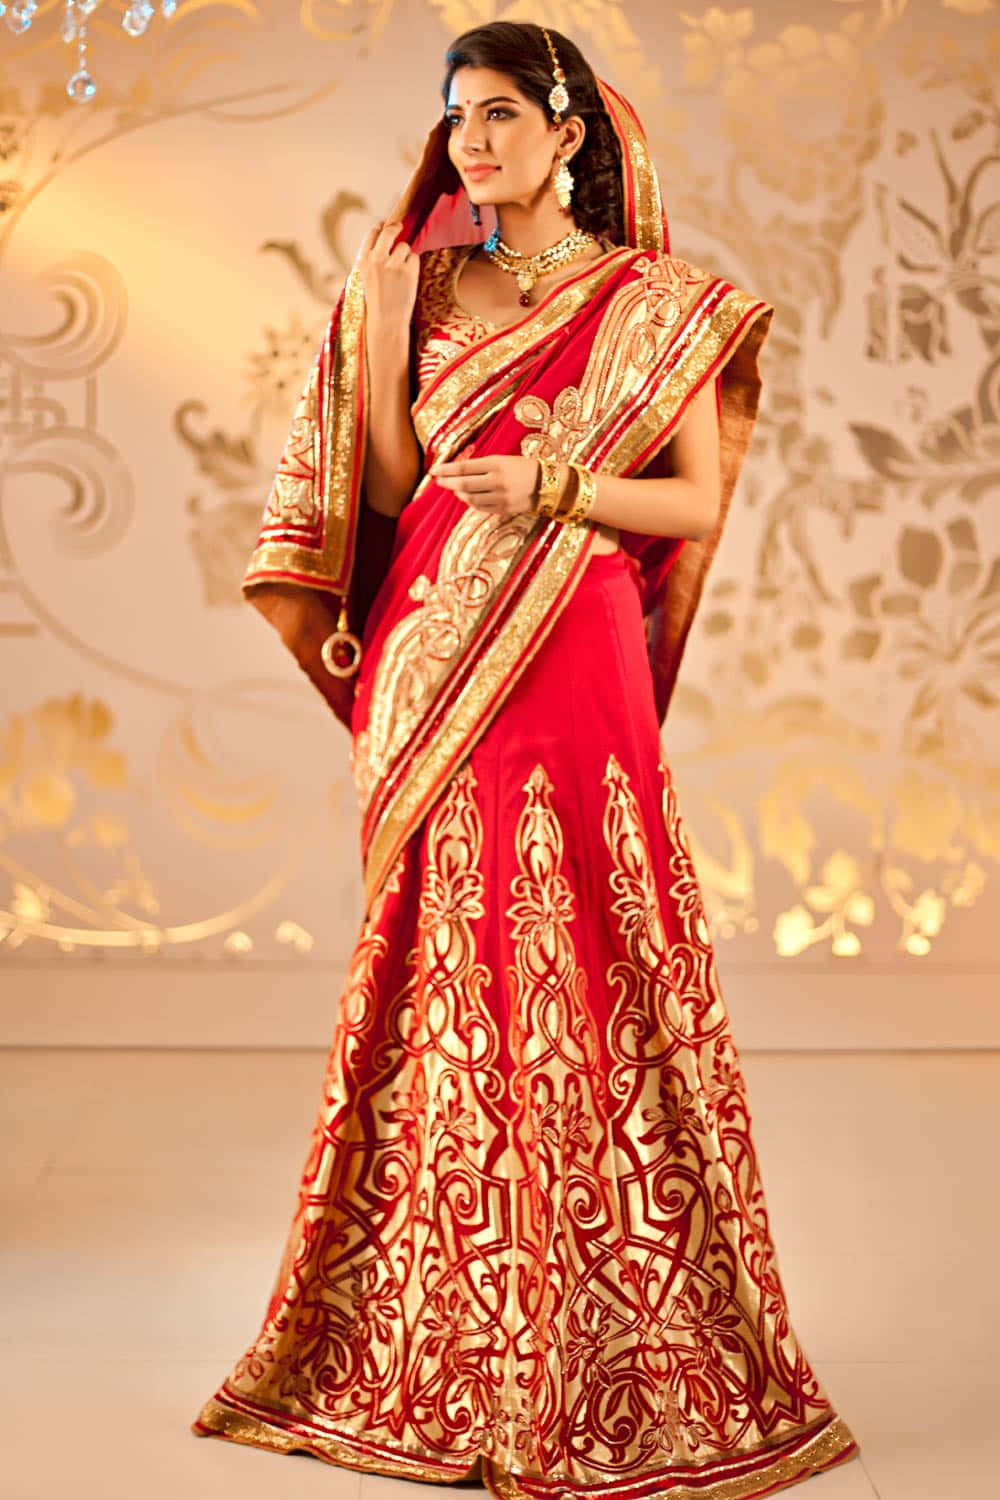 "Stunning Indian Bride in Traditional Attire"